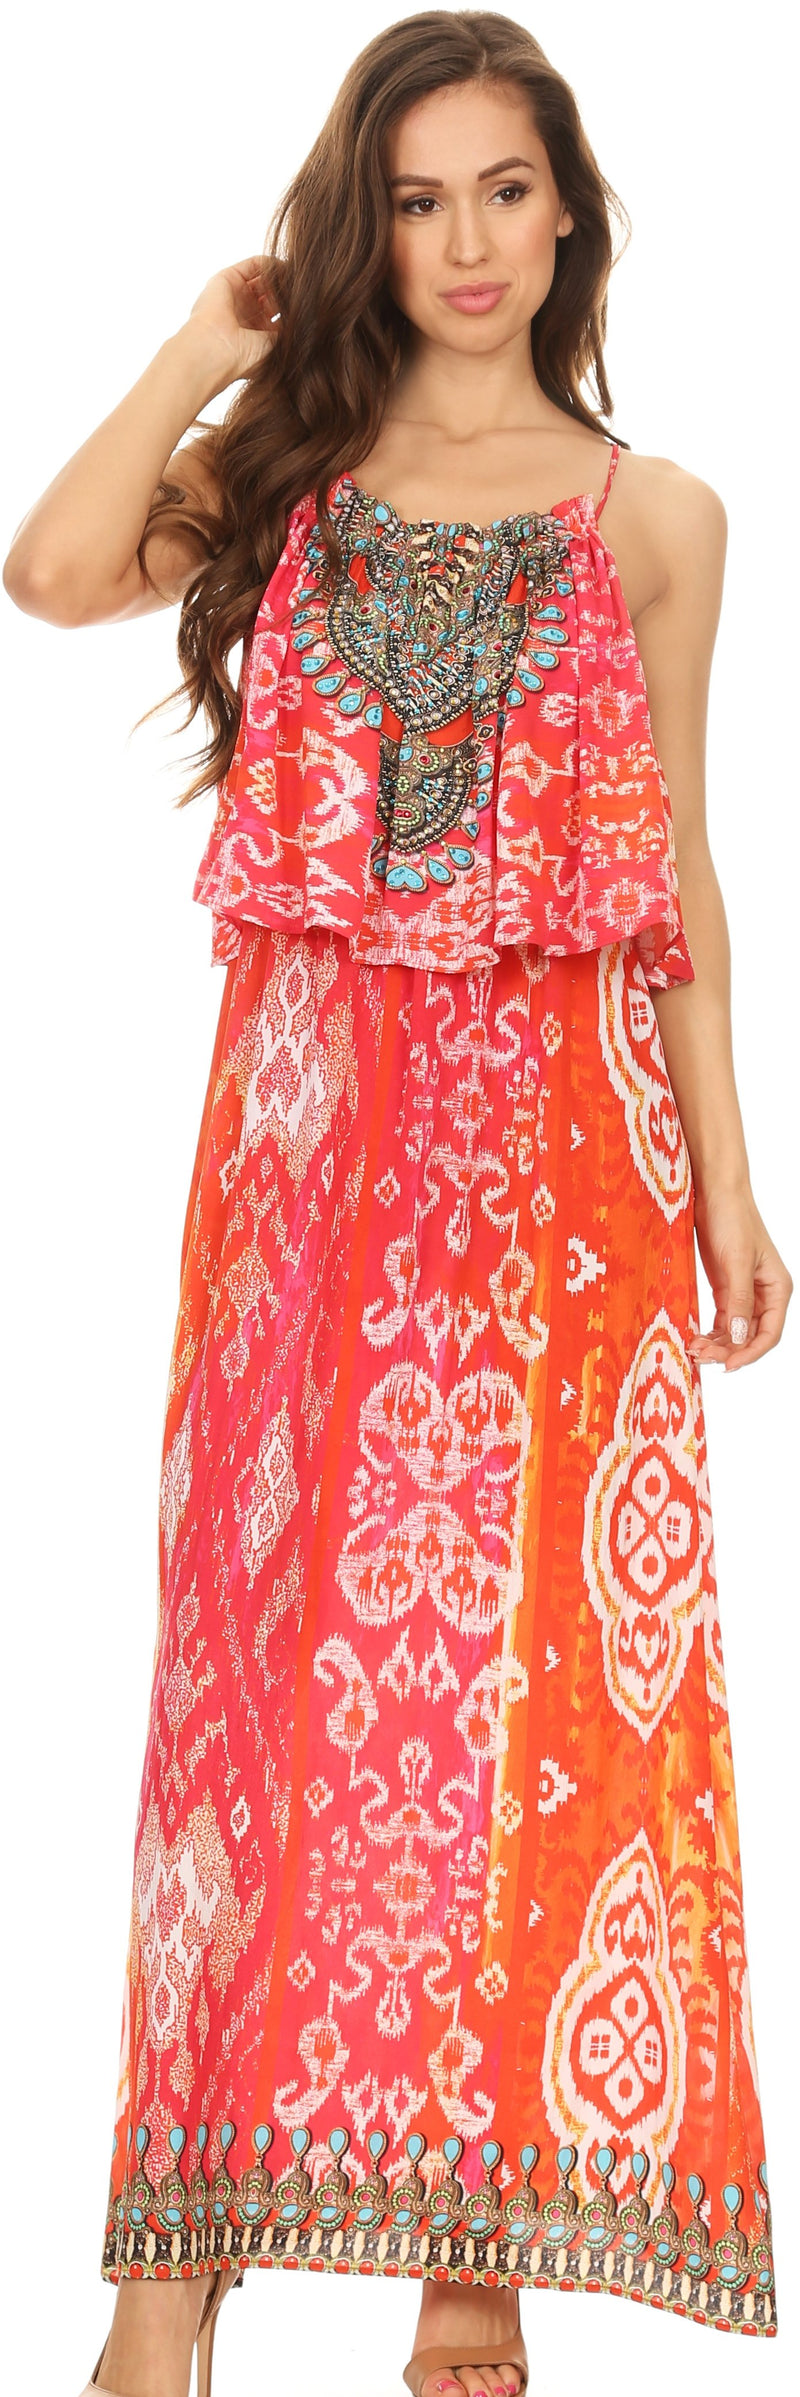 Sakkas Itika Sleeveless Printed Overlay Maxi Dress | Cover Up with Ruched Neckline